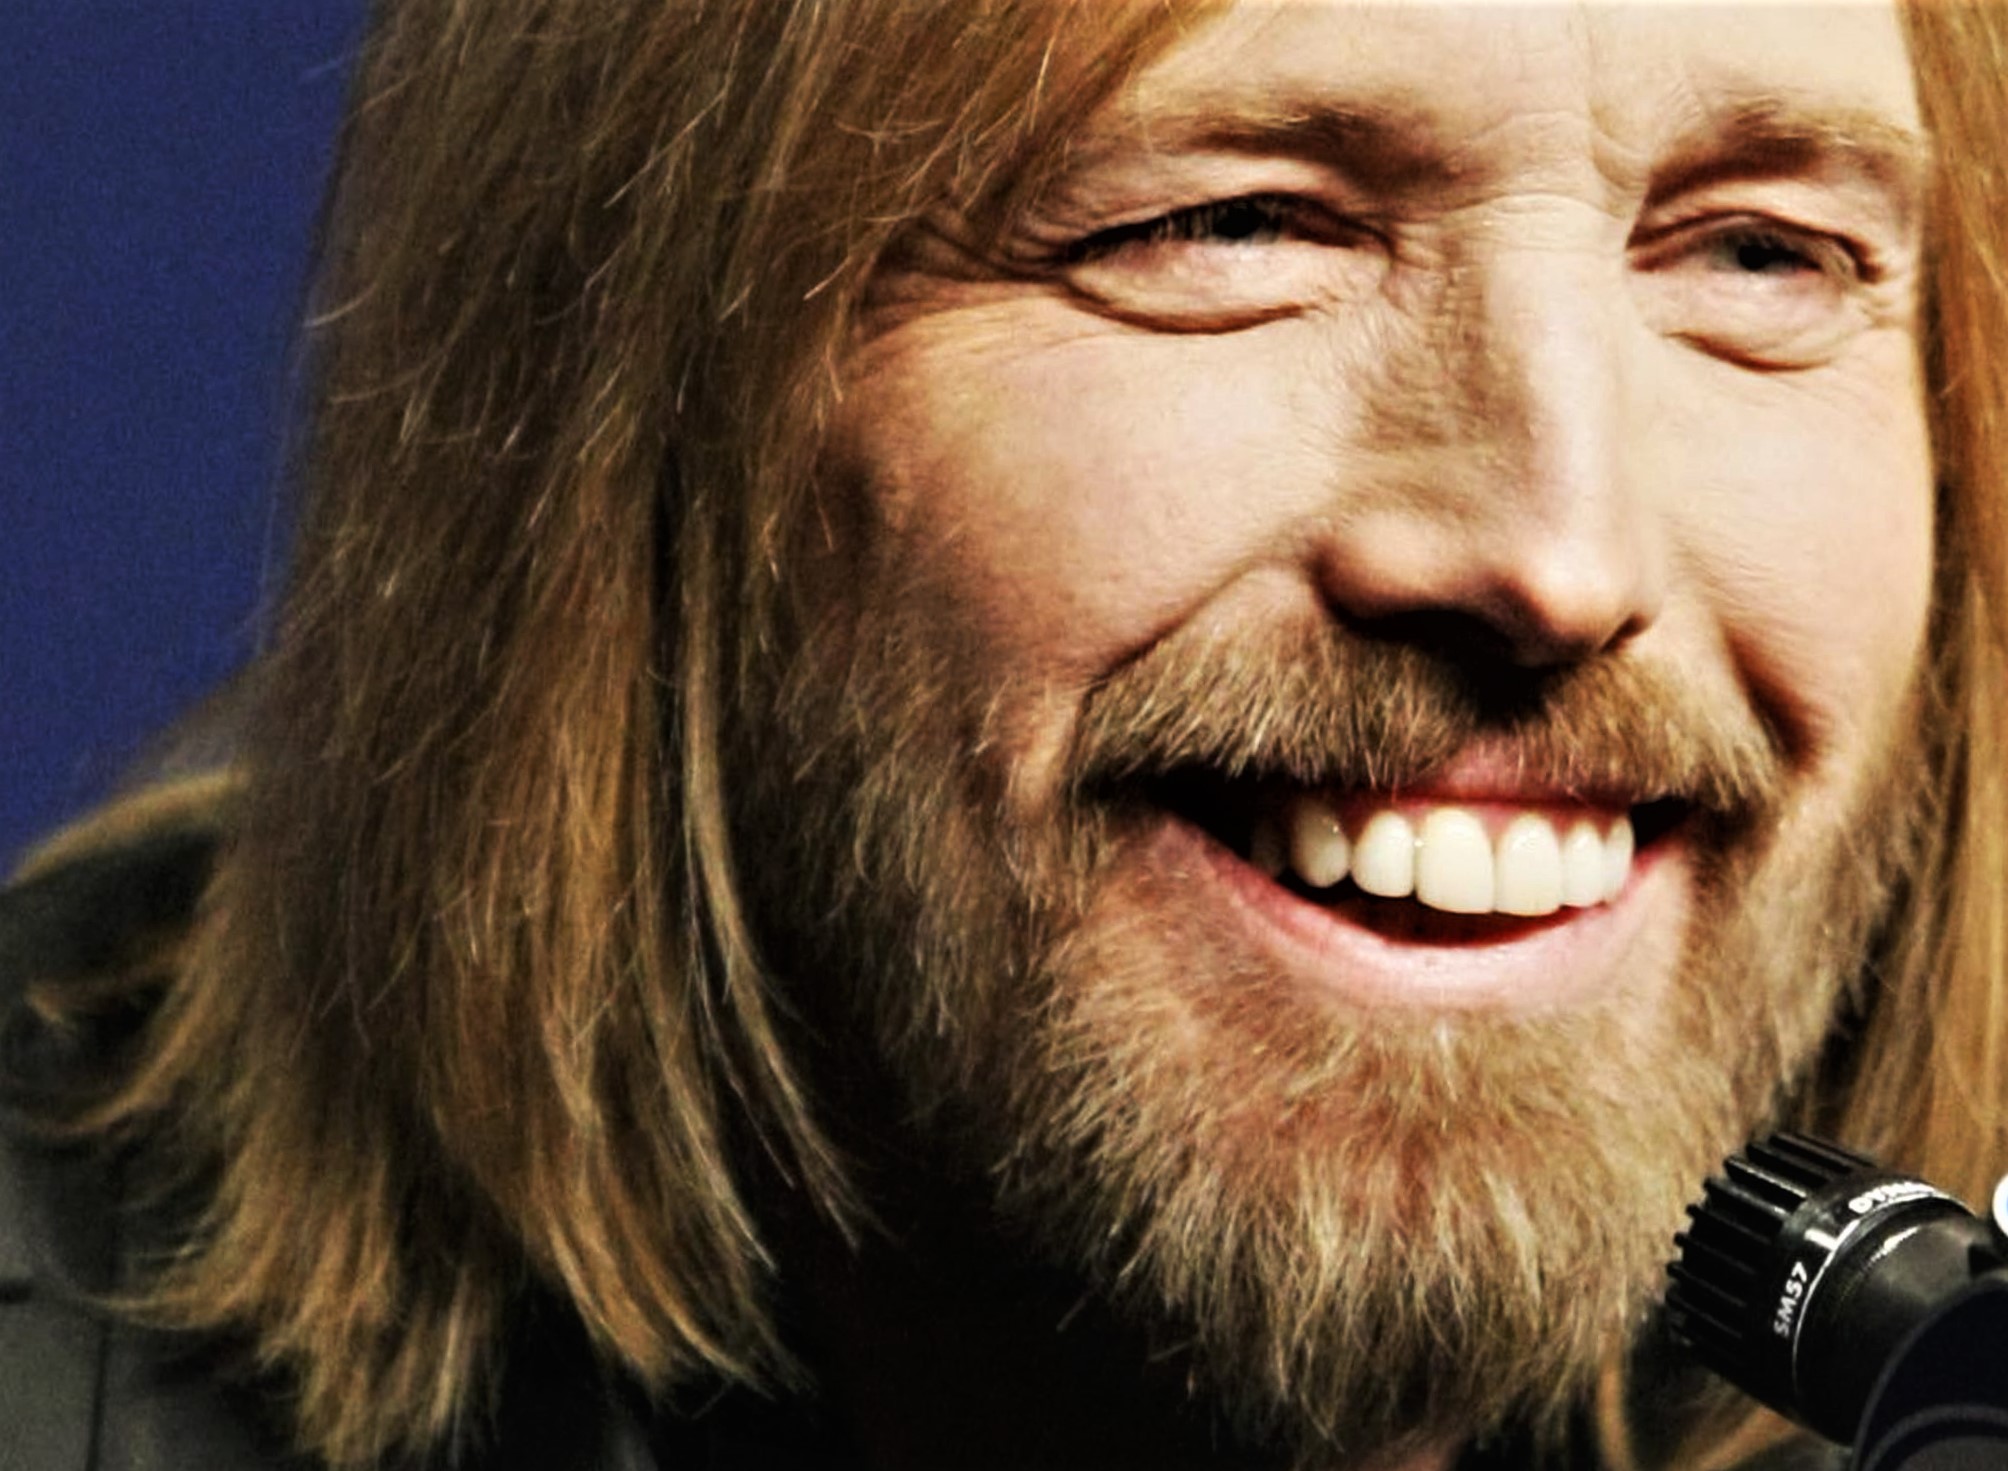 Never Before Released Audio: Tom Petty on Rhyming